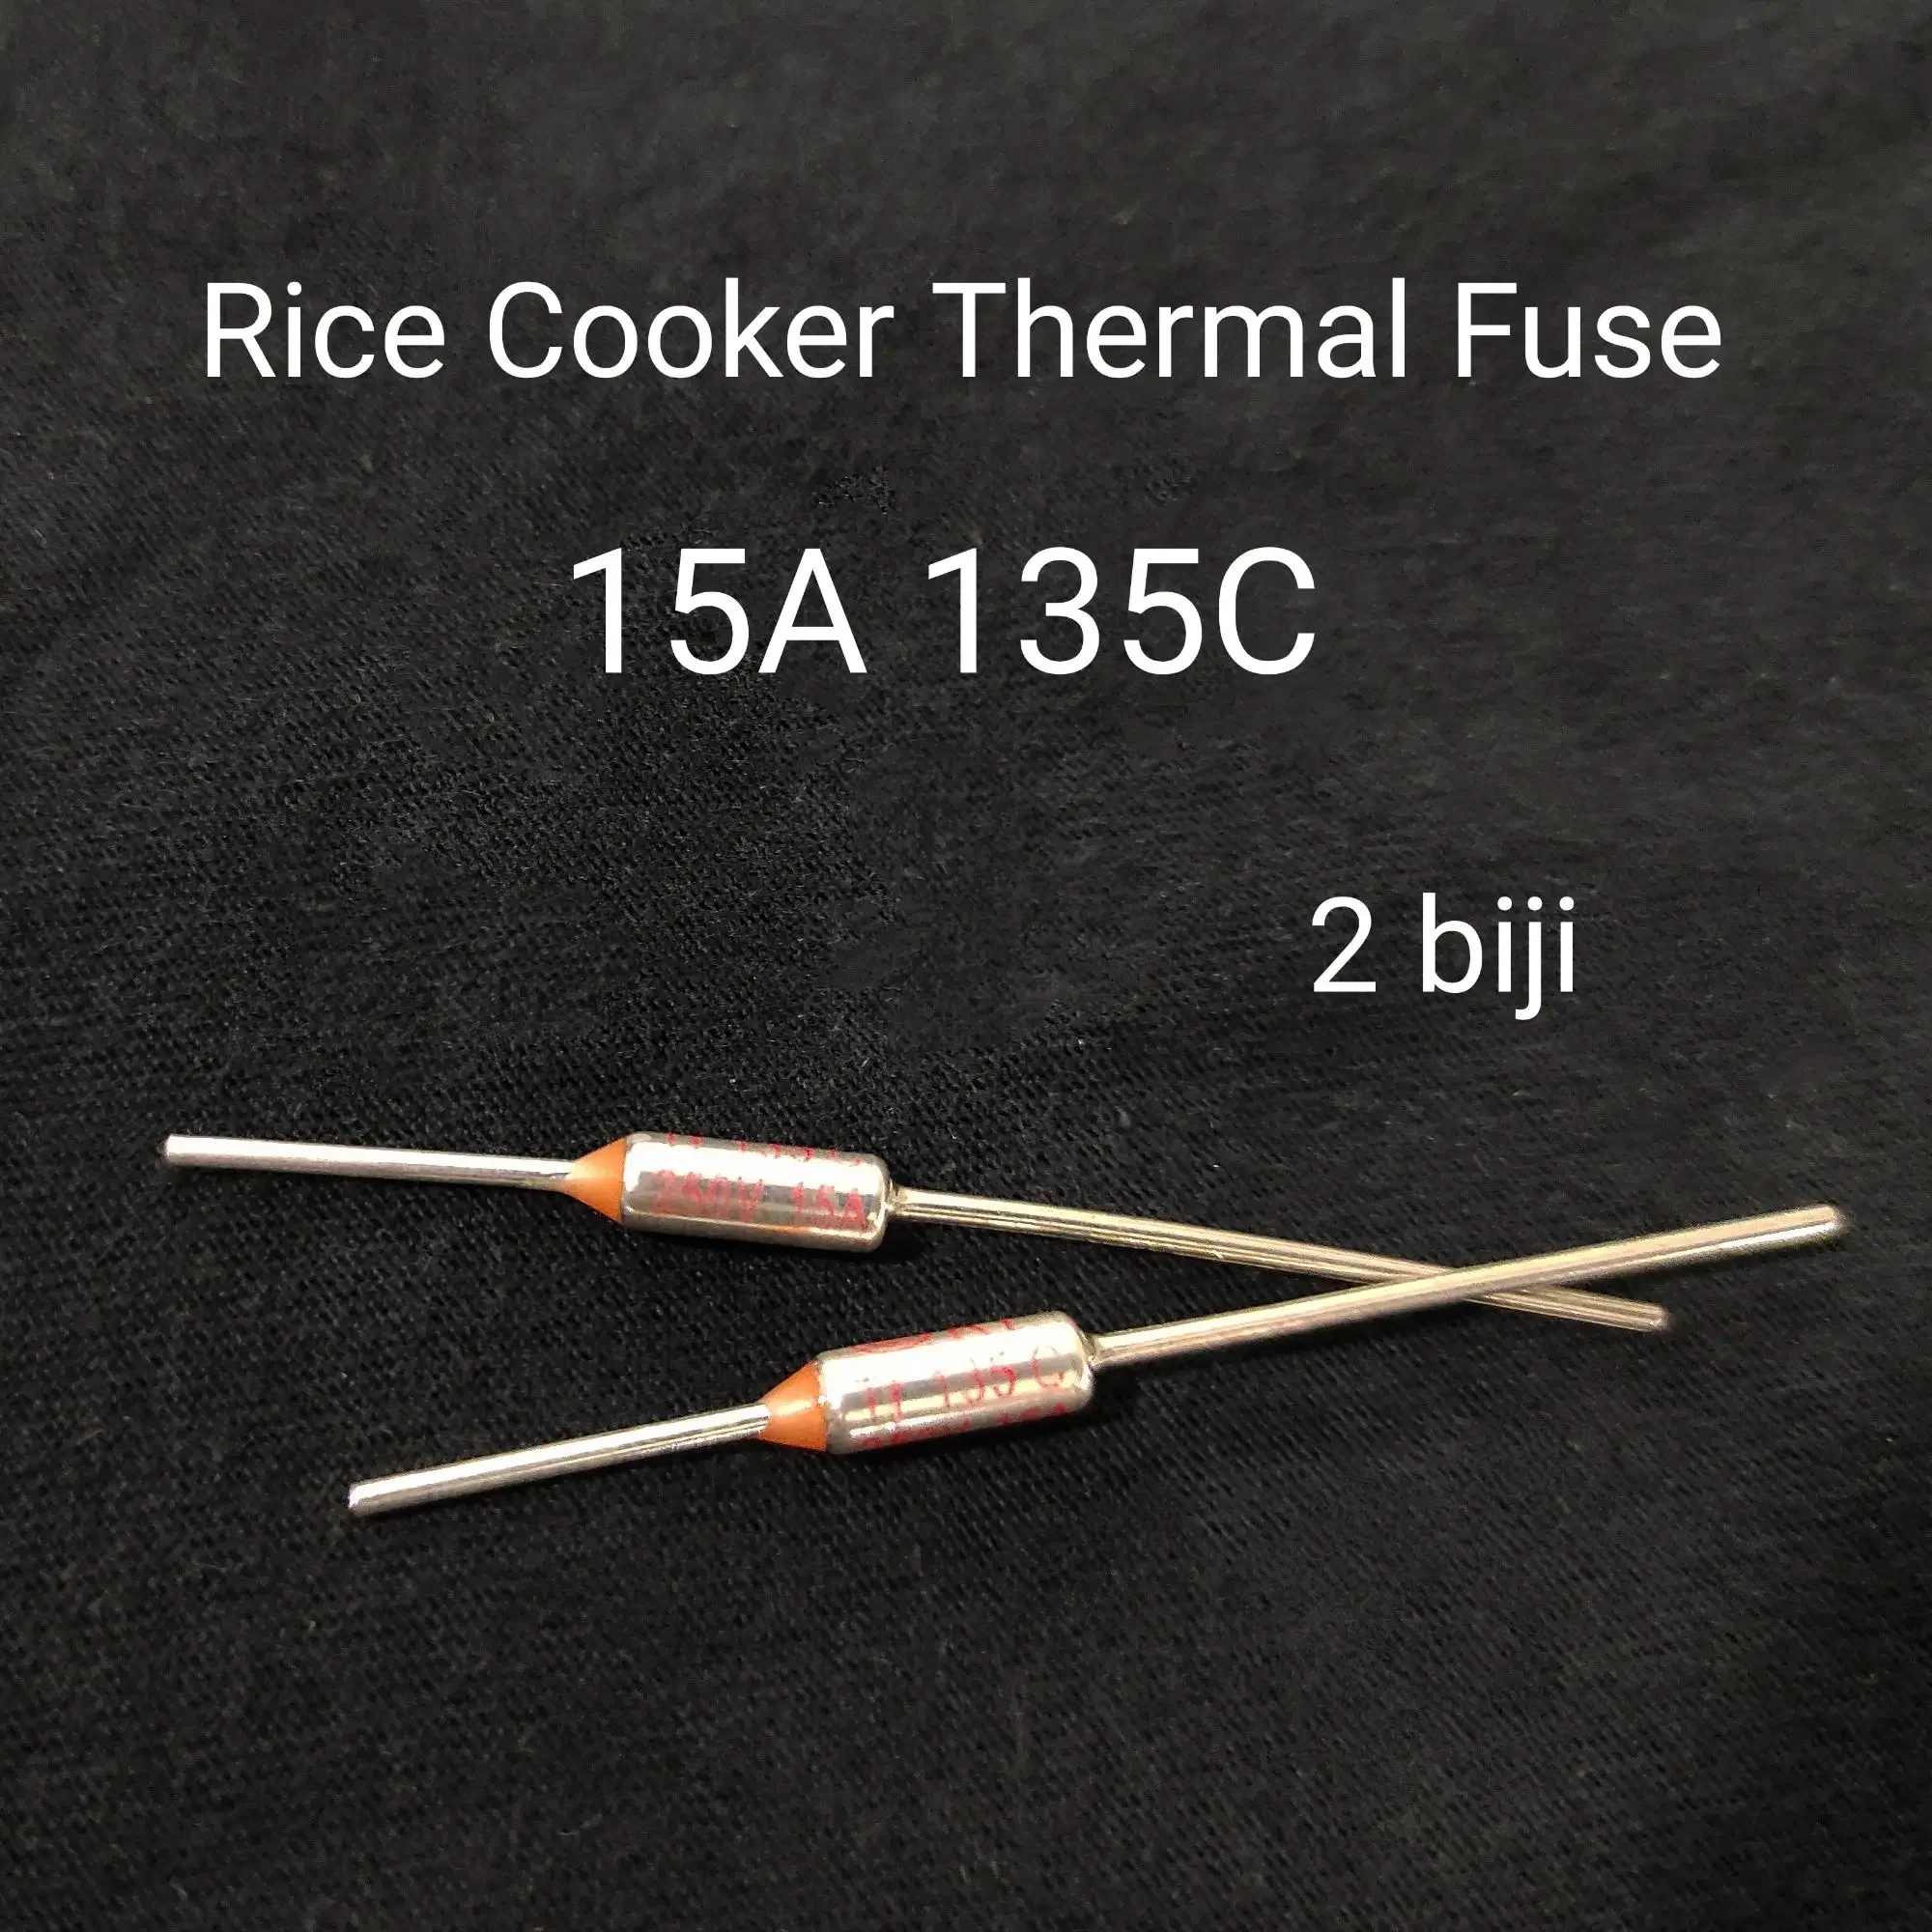 2 Biji 15A 135C Rice Cooker Thermal Fuse thermo fuse